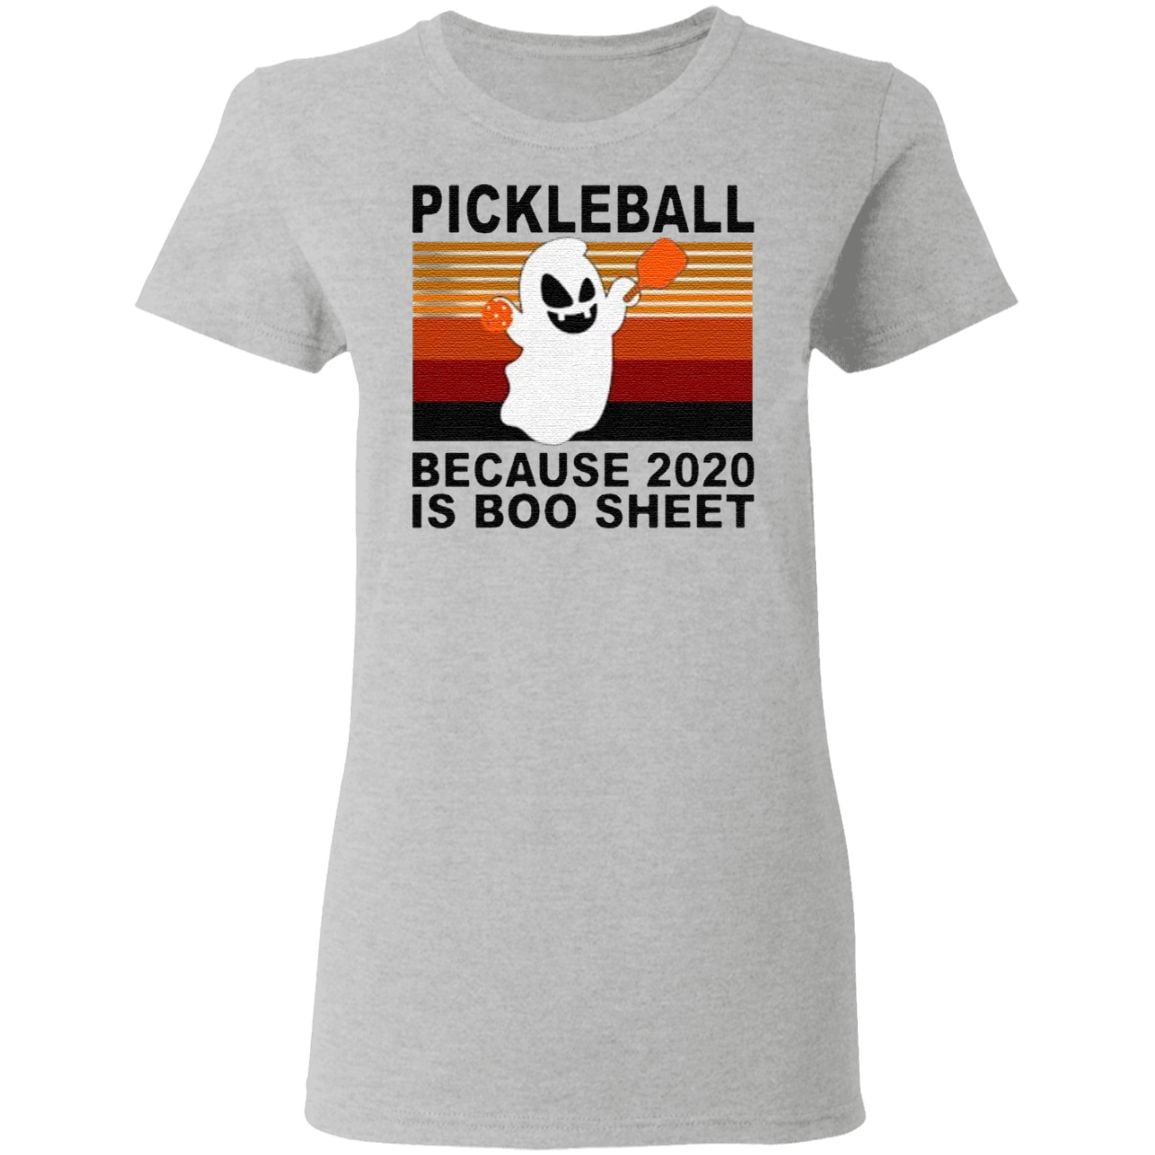 Pickleball because 2020 is boo sheet vintage shirt